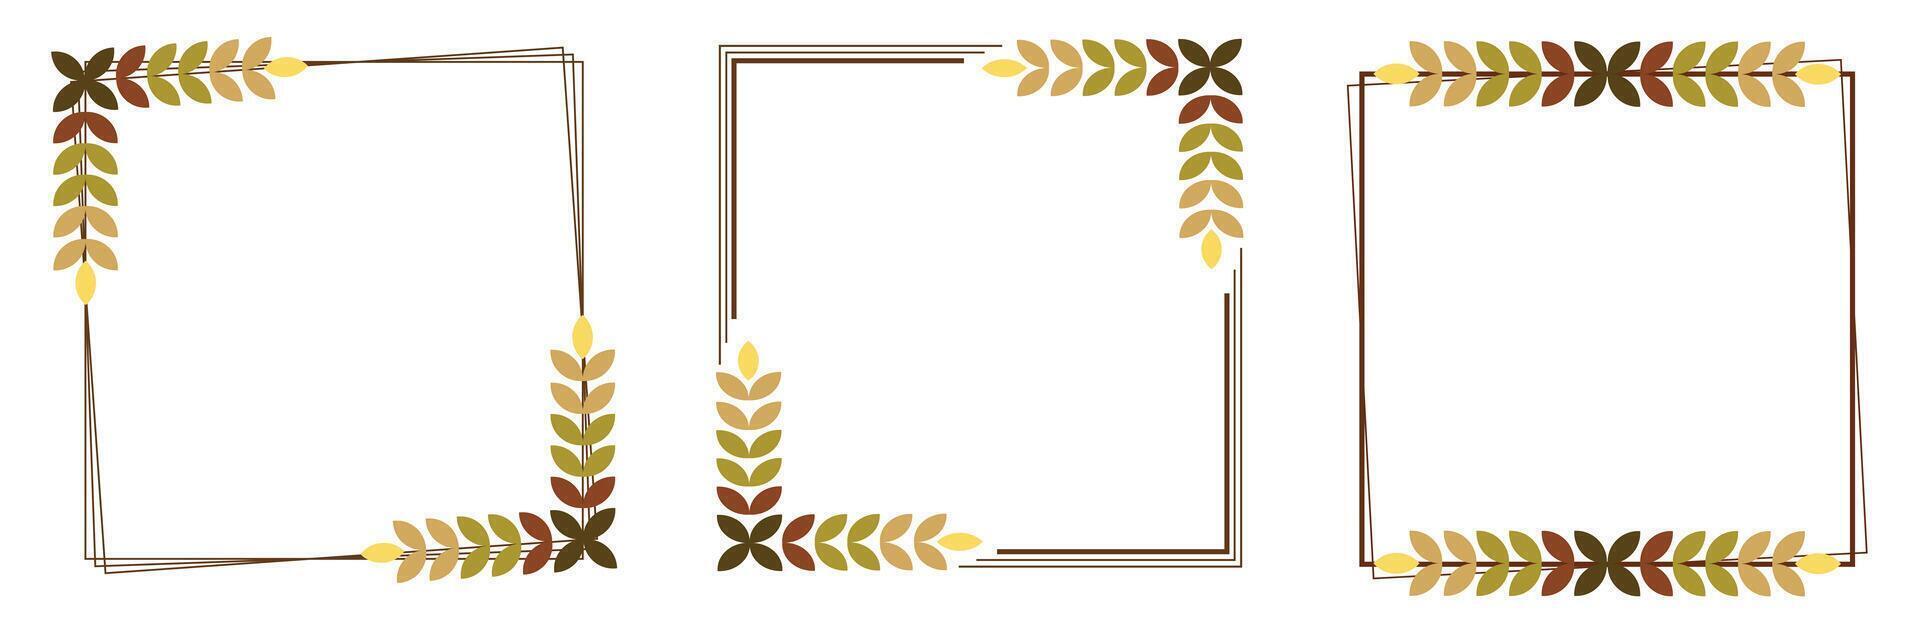 Simple Square Frame With Autumn Leaves Vector